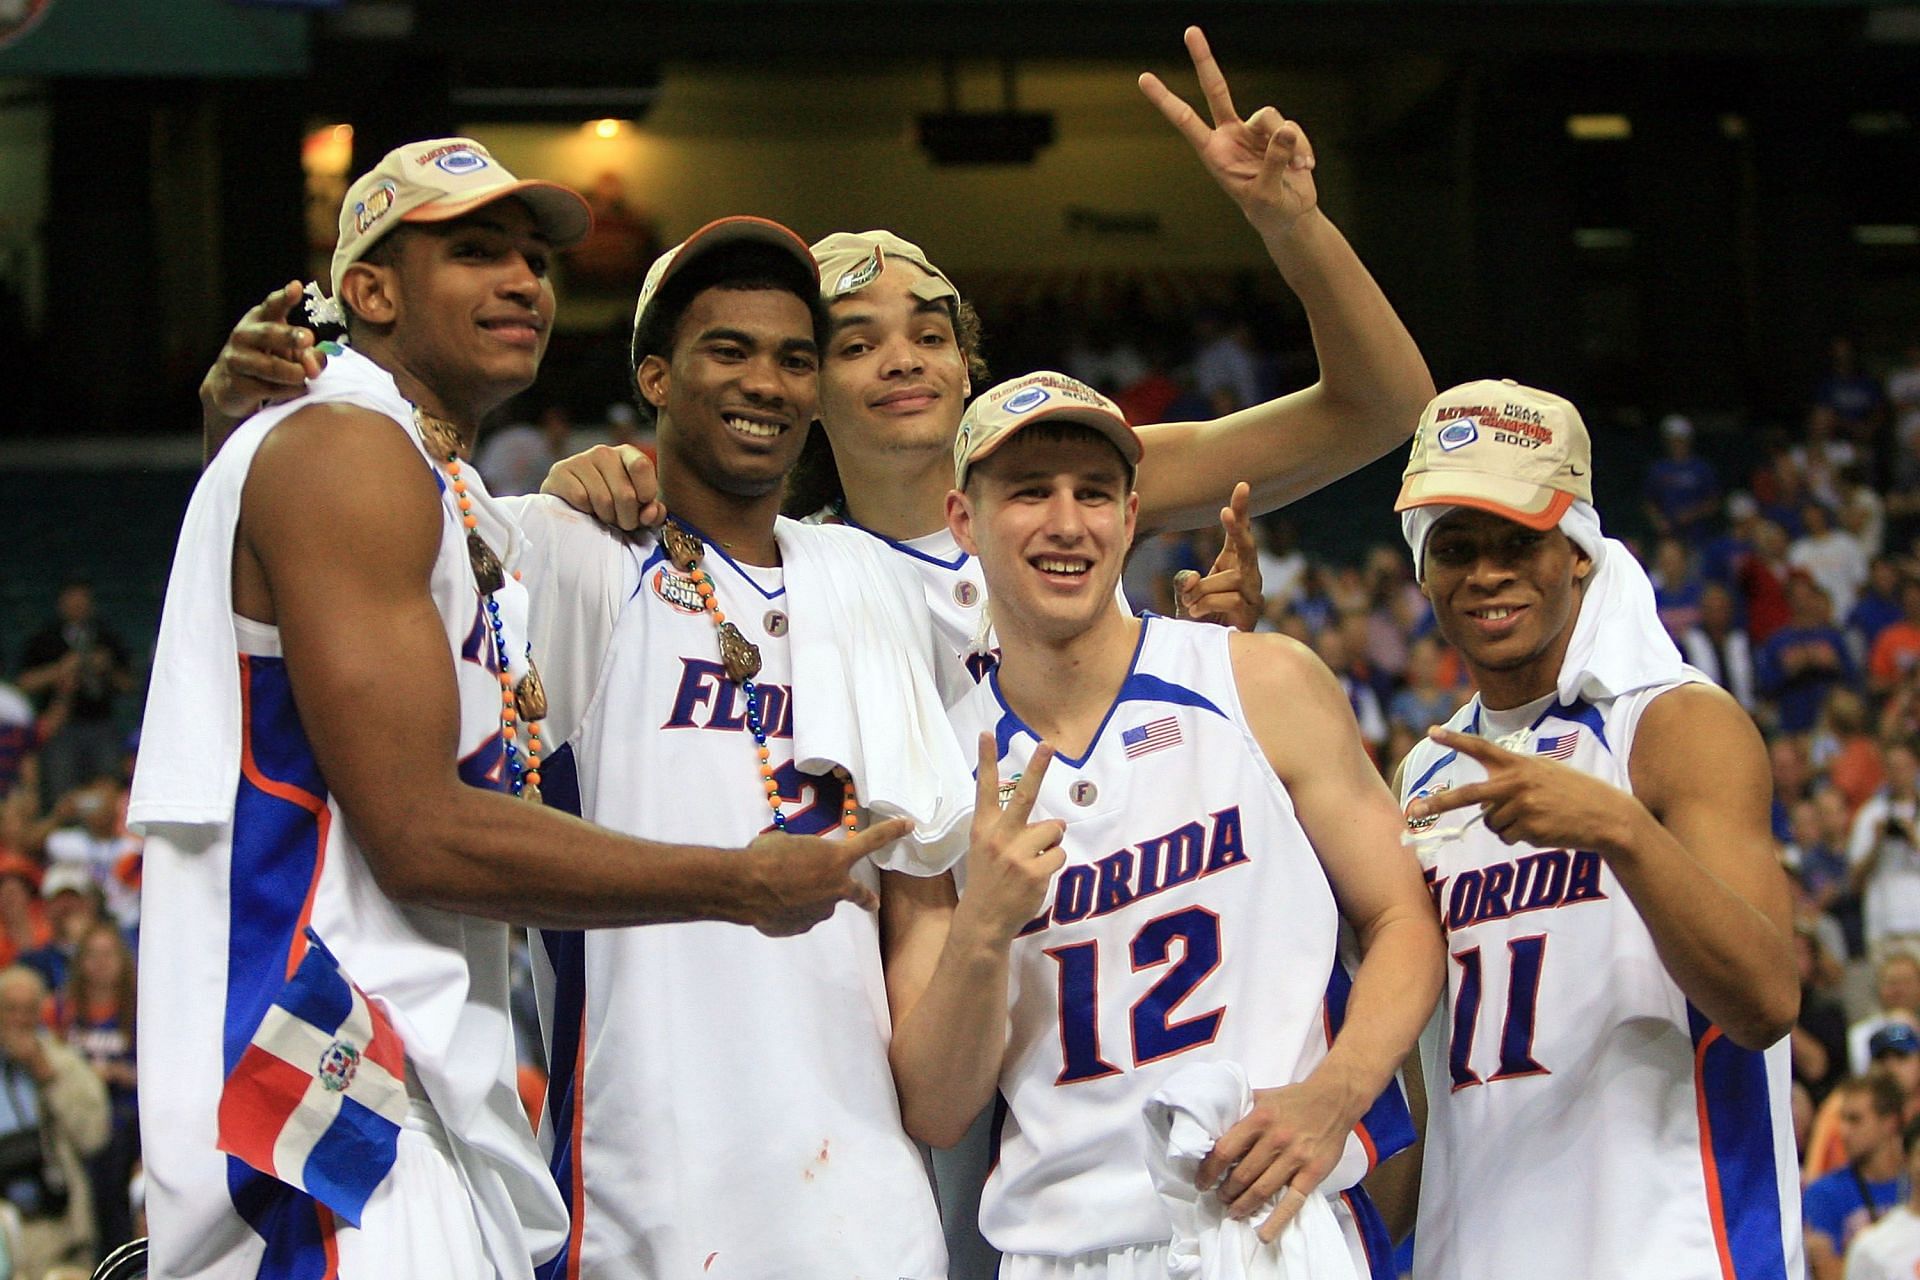 Al Horford #42, Taurean Green #11, Joakim Noah #13, Lee Humphrey #12 and Corey Brewer #2 of the Florida Gators celerate after defeating the Ohio State Buckeyes during the NCAA Men&#039;s Basketball Championship game